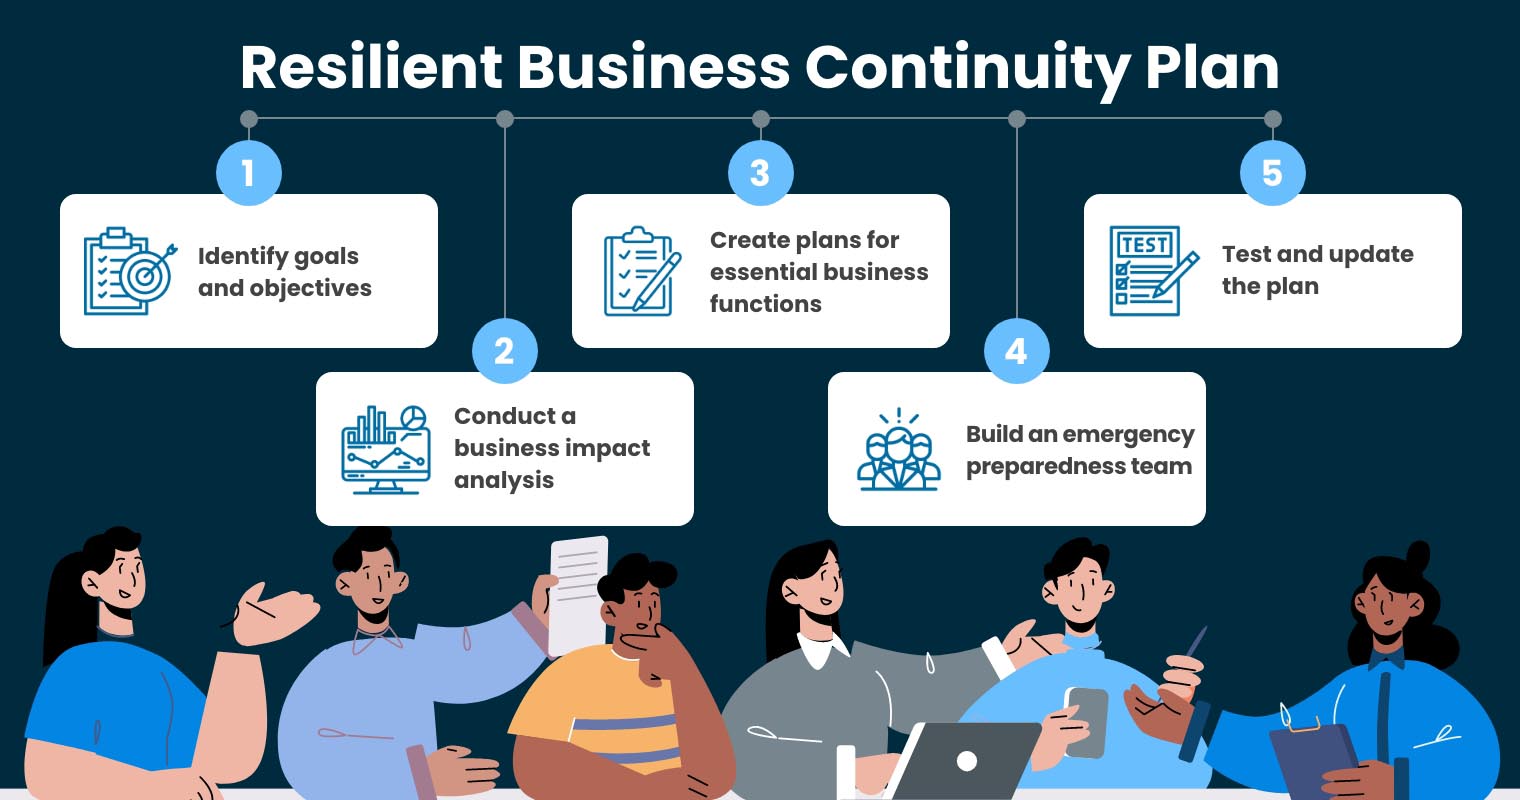 Steps in Creating a Resilient Business Continuity Plan